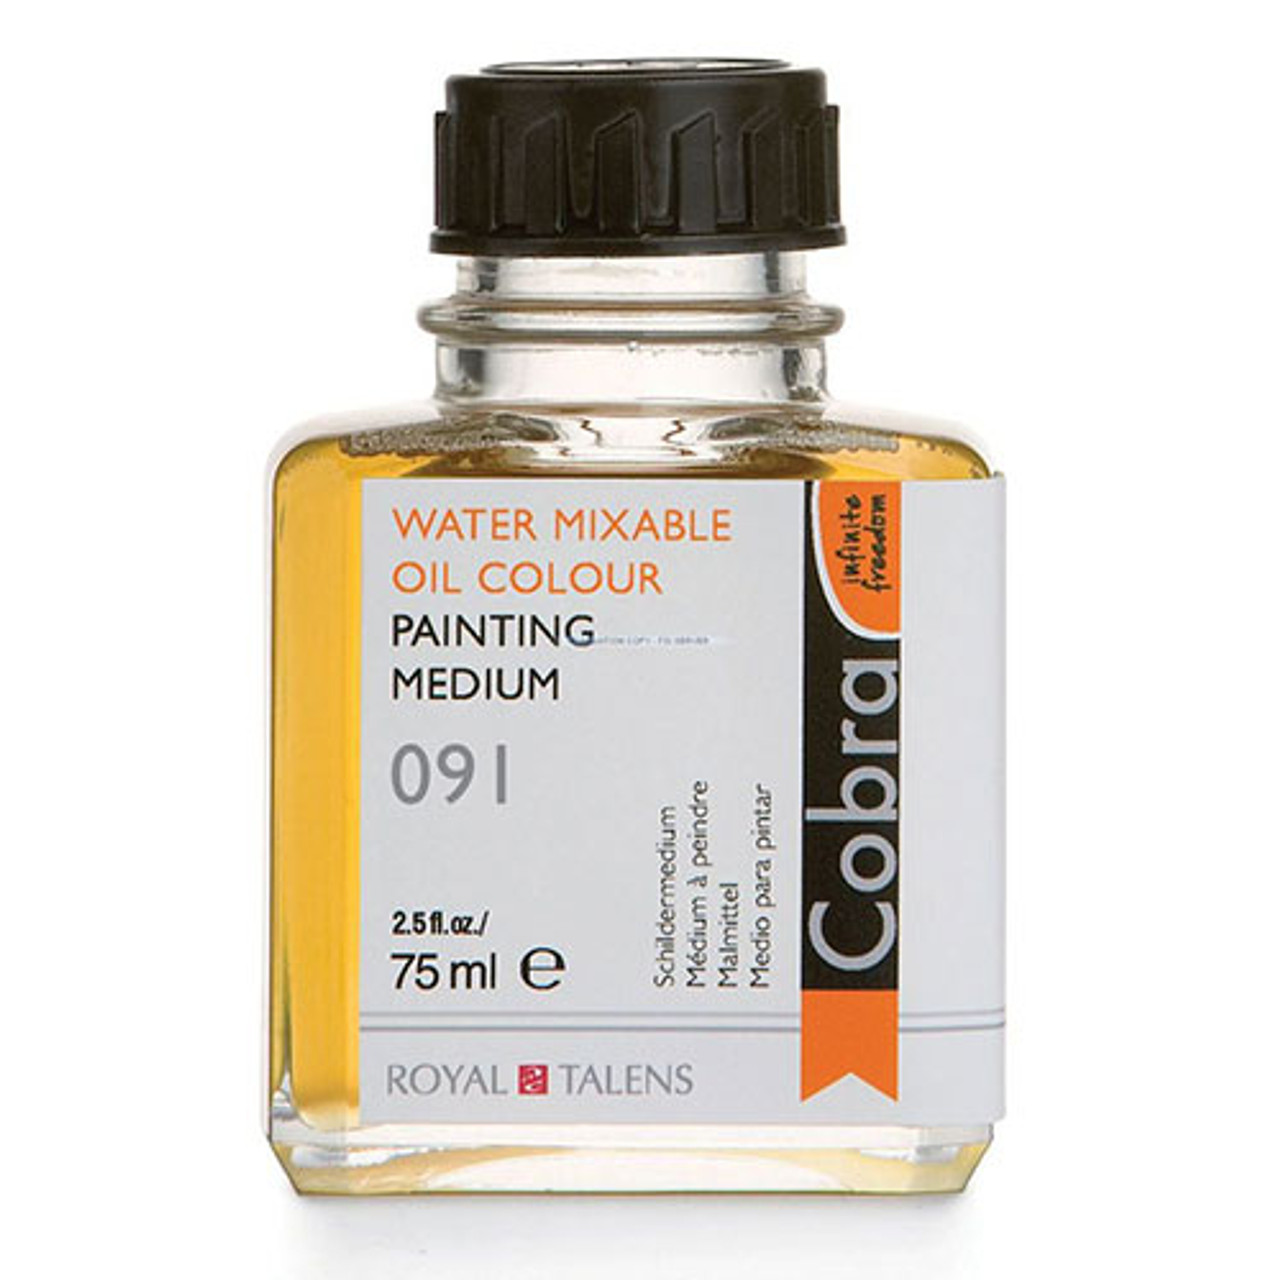 Water Mixable Oil Colour Painting Medium 2.5 fl. oz.